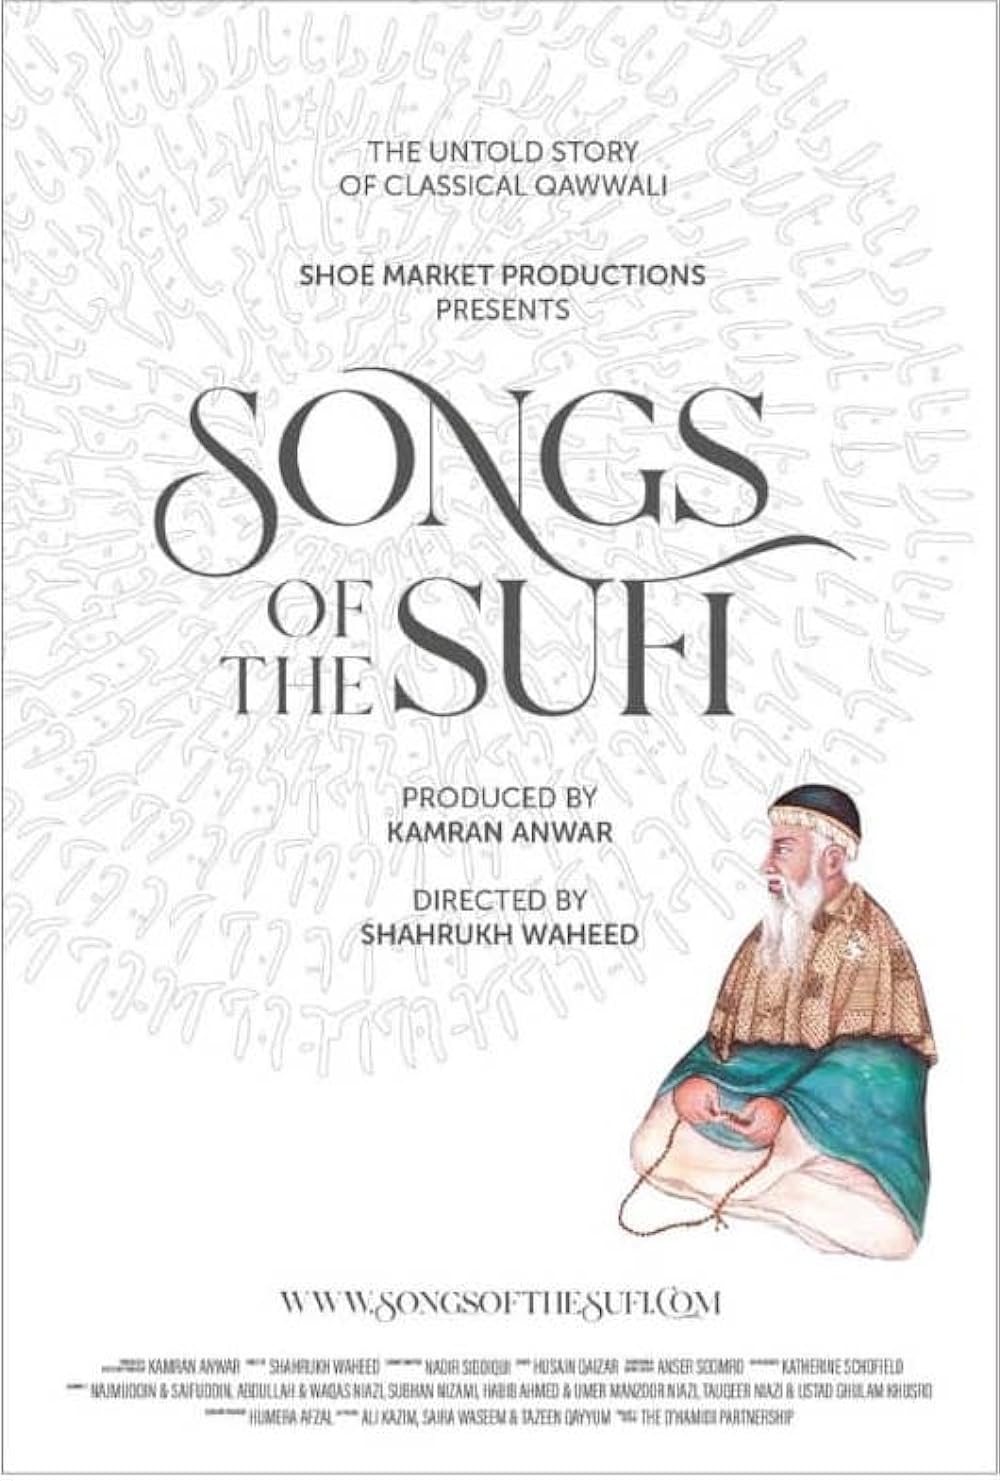 Songs of the Sufi